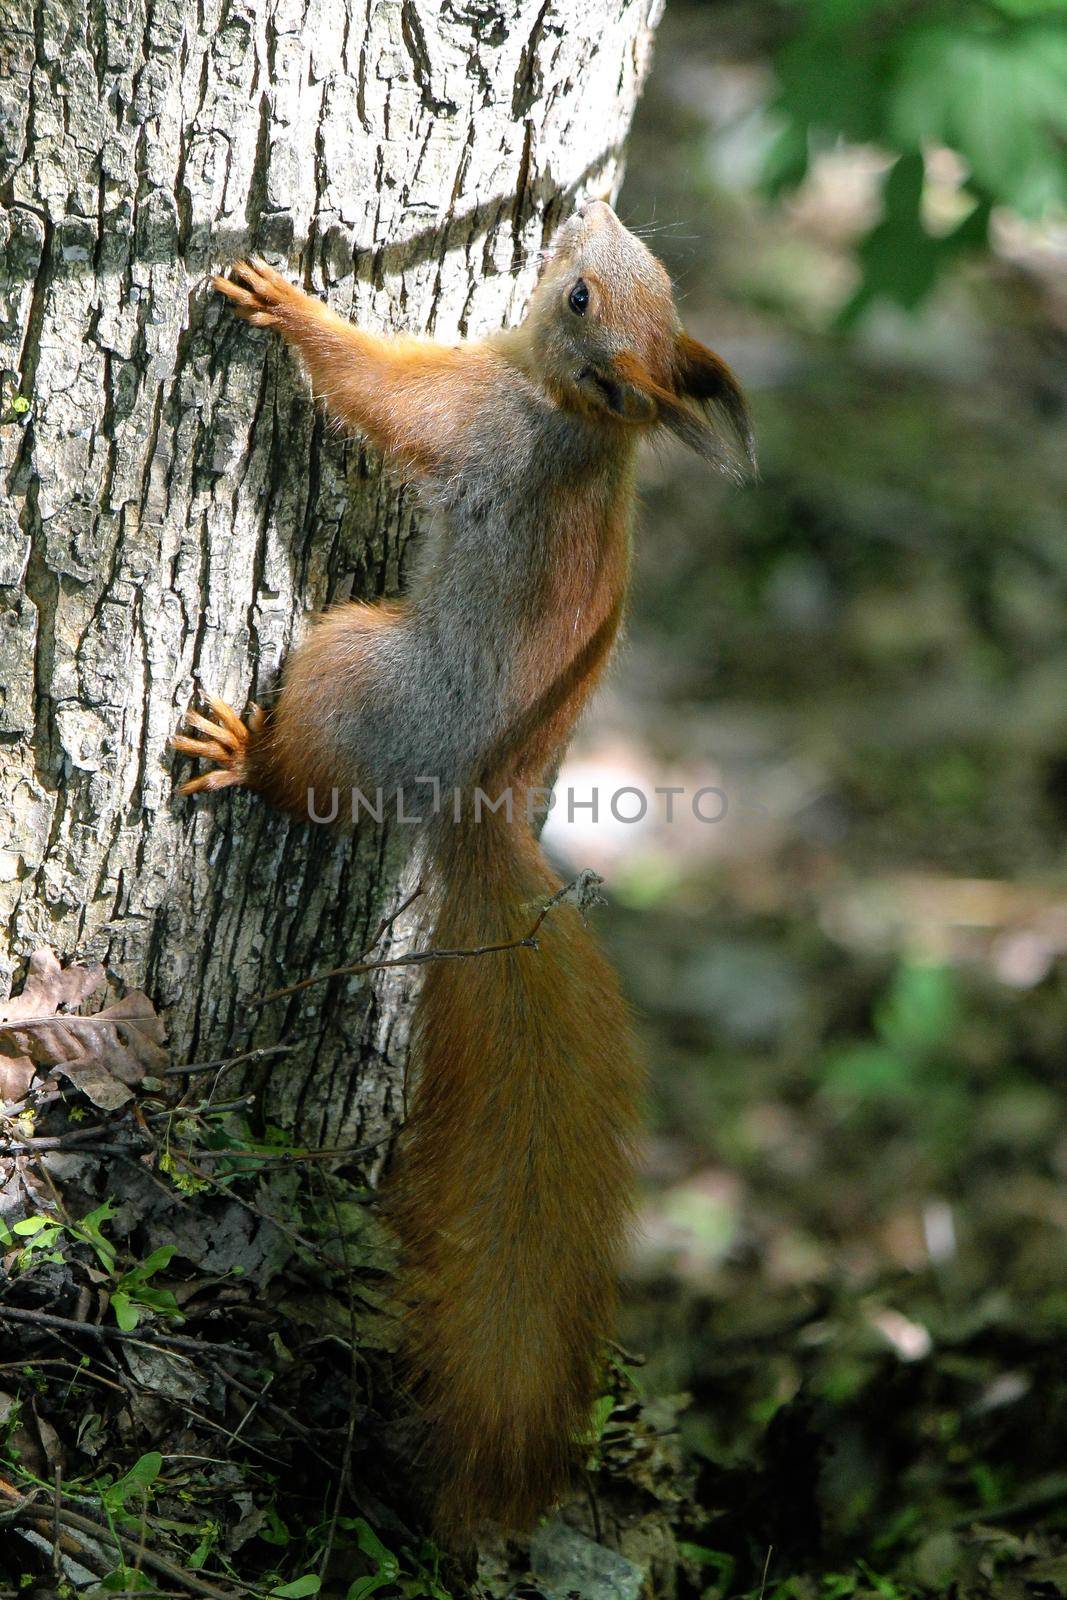 Red squirrel climbs a tree on a summer day in the sun by grekoni